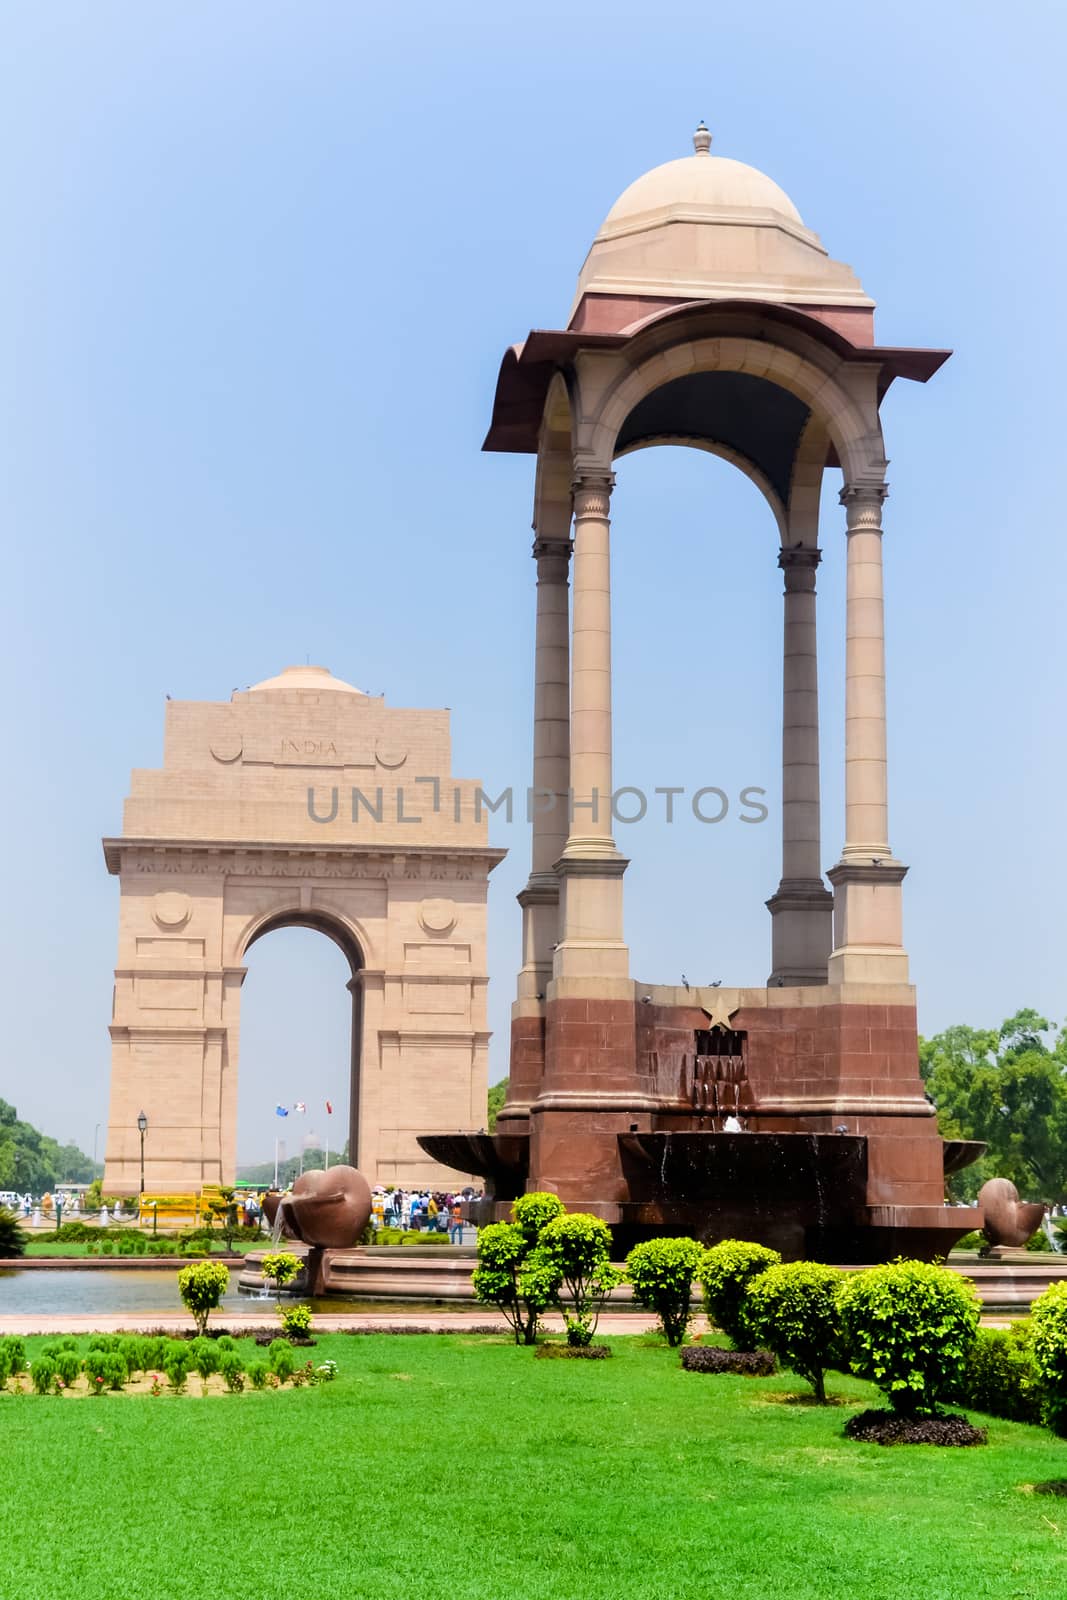 Rajpath, Raisina Hill, New Delhi, India January 2019: The Canopy lies 150 meters from the India Gate. The vacant canopy, constructed in red sandstone, is a symbol of British’s retreat from India. by sudiptabhowmick